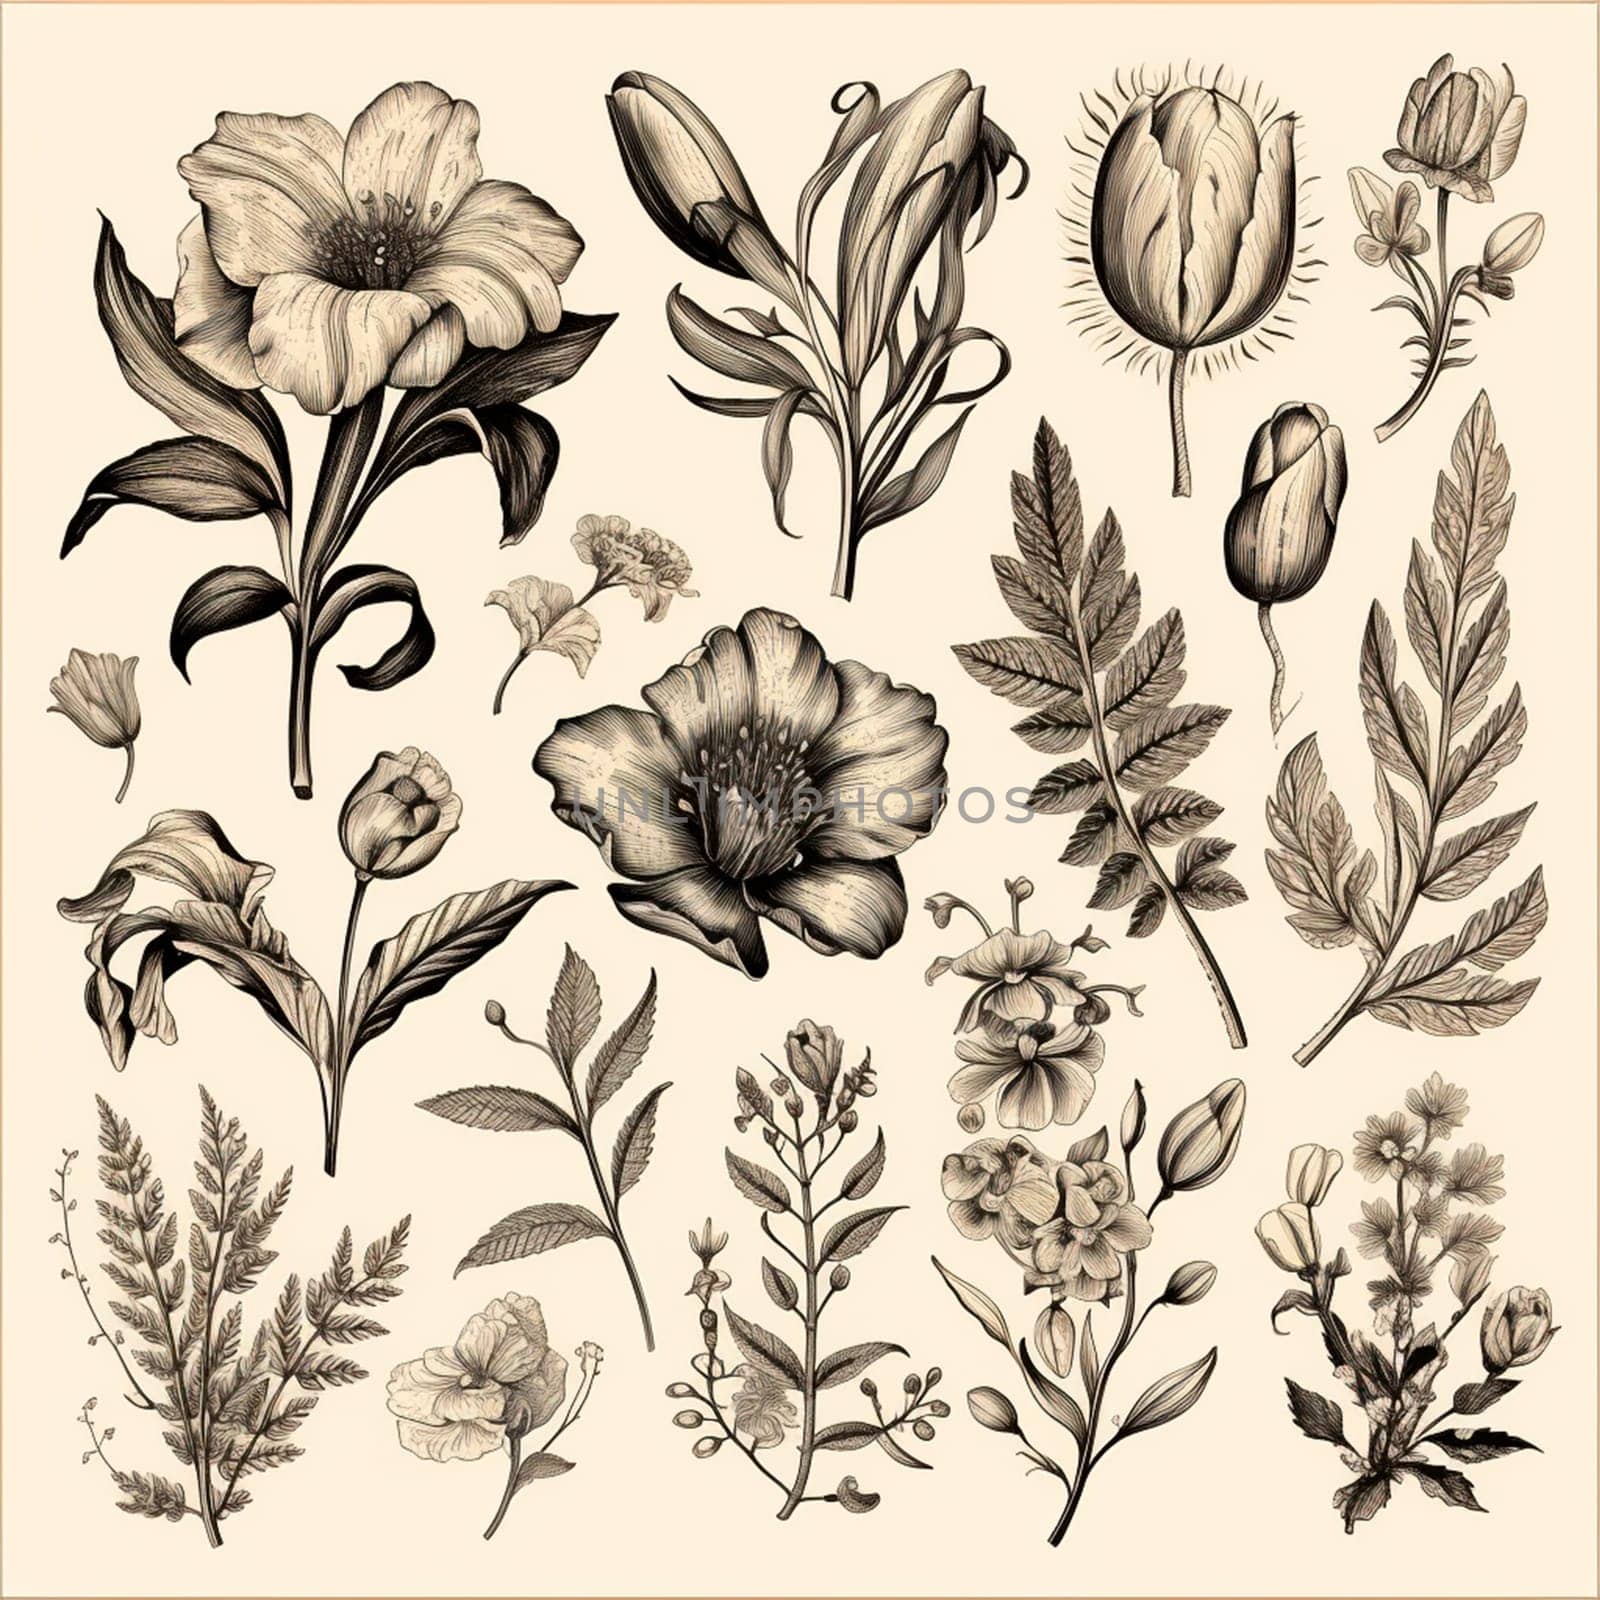 Black and white drawings of flowers and plants, hand drawings by BEMPhoto